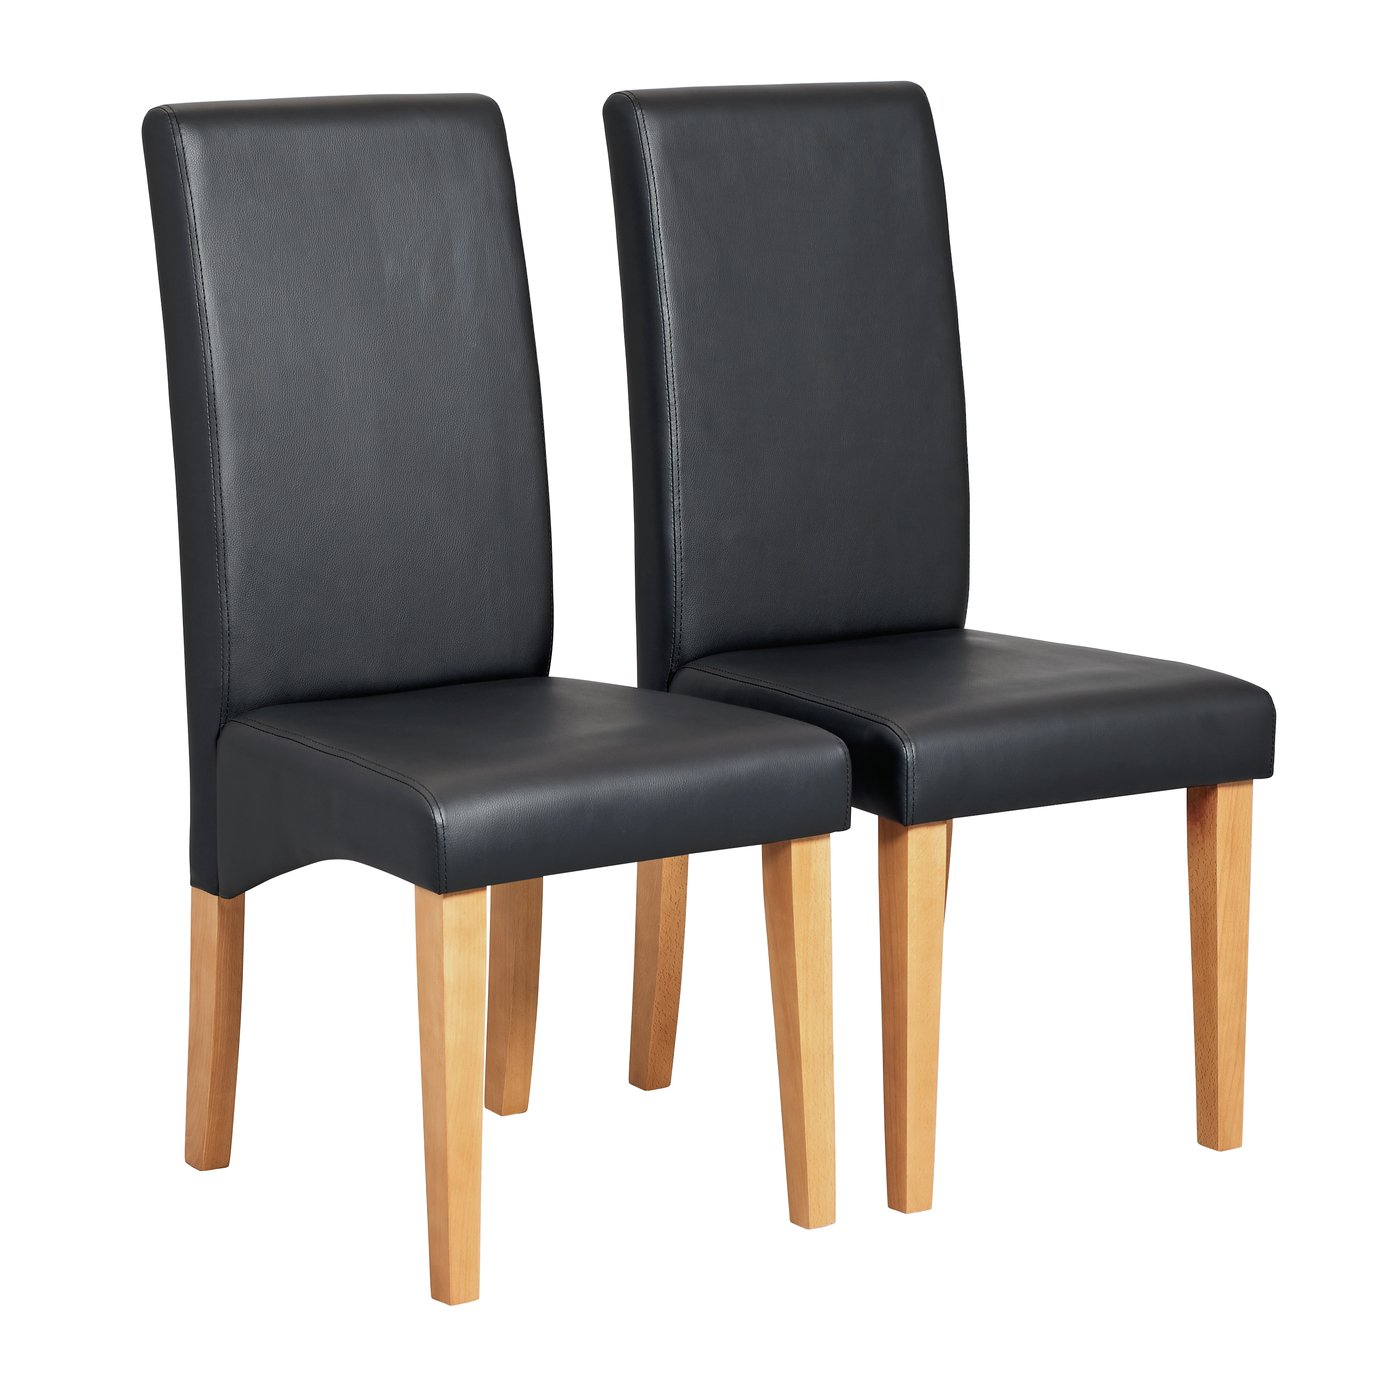 Argos Home Pair of Skirted Dining Chairs - Black